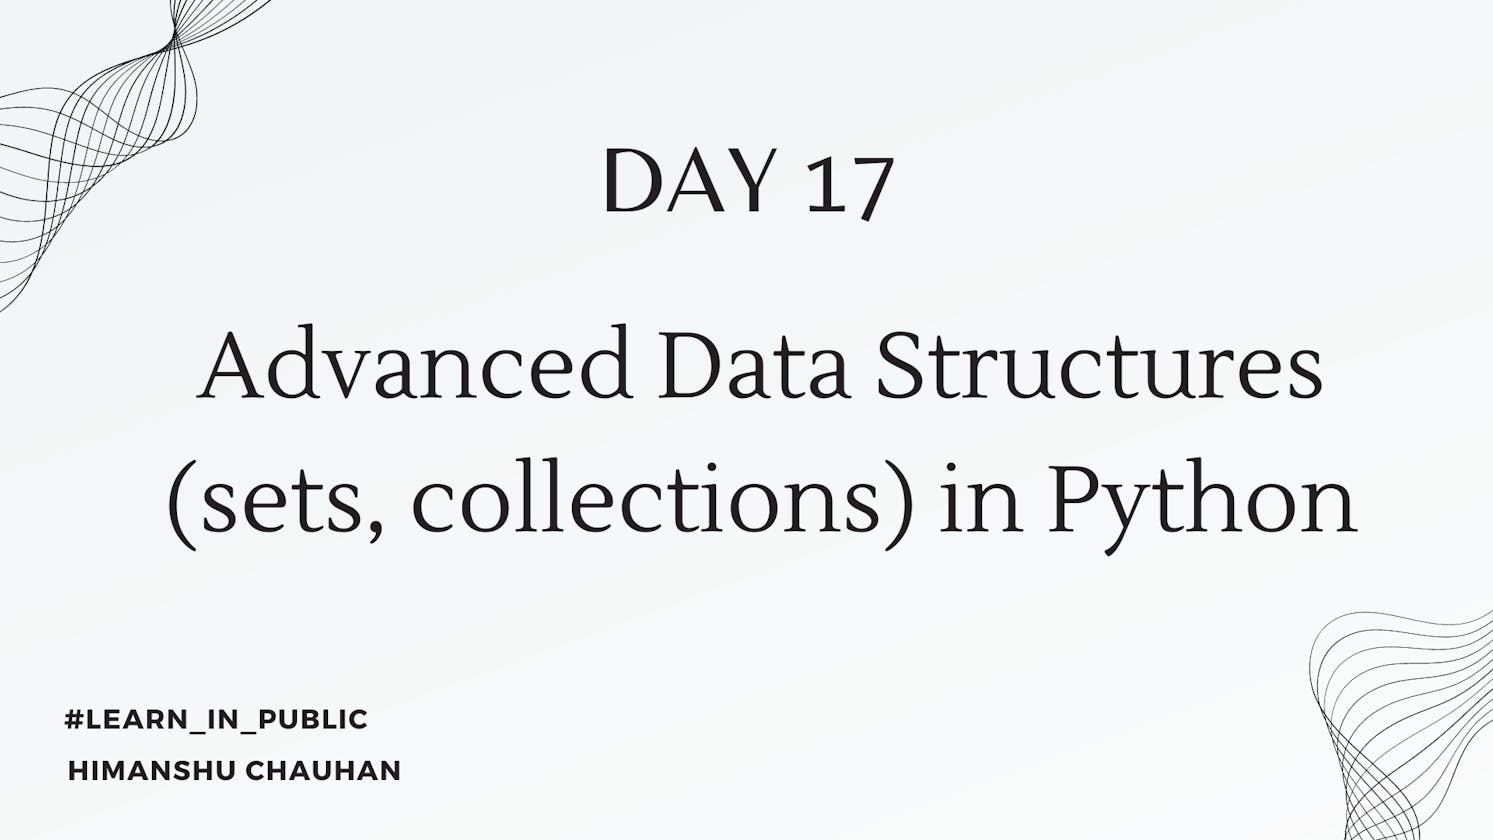 Day 17: Advanced Data Structures (sets, collections) in Python